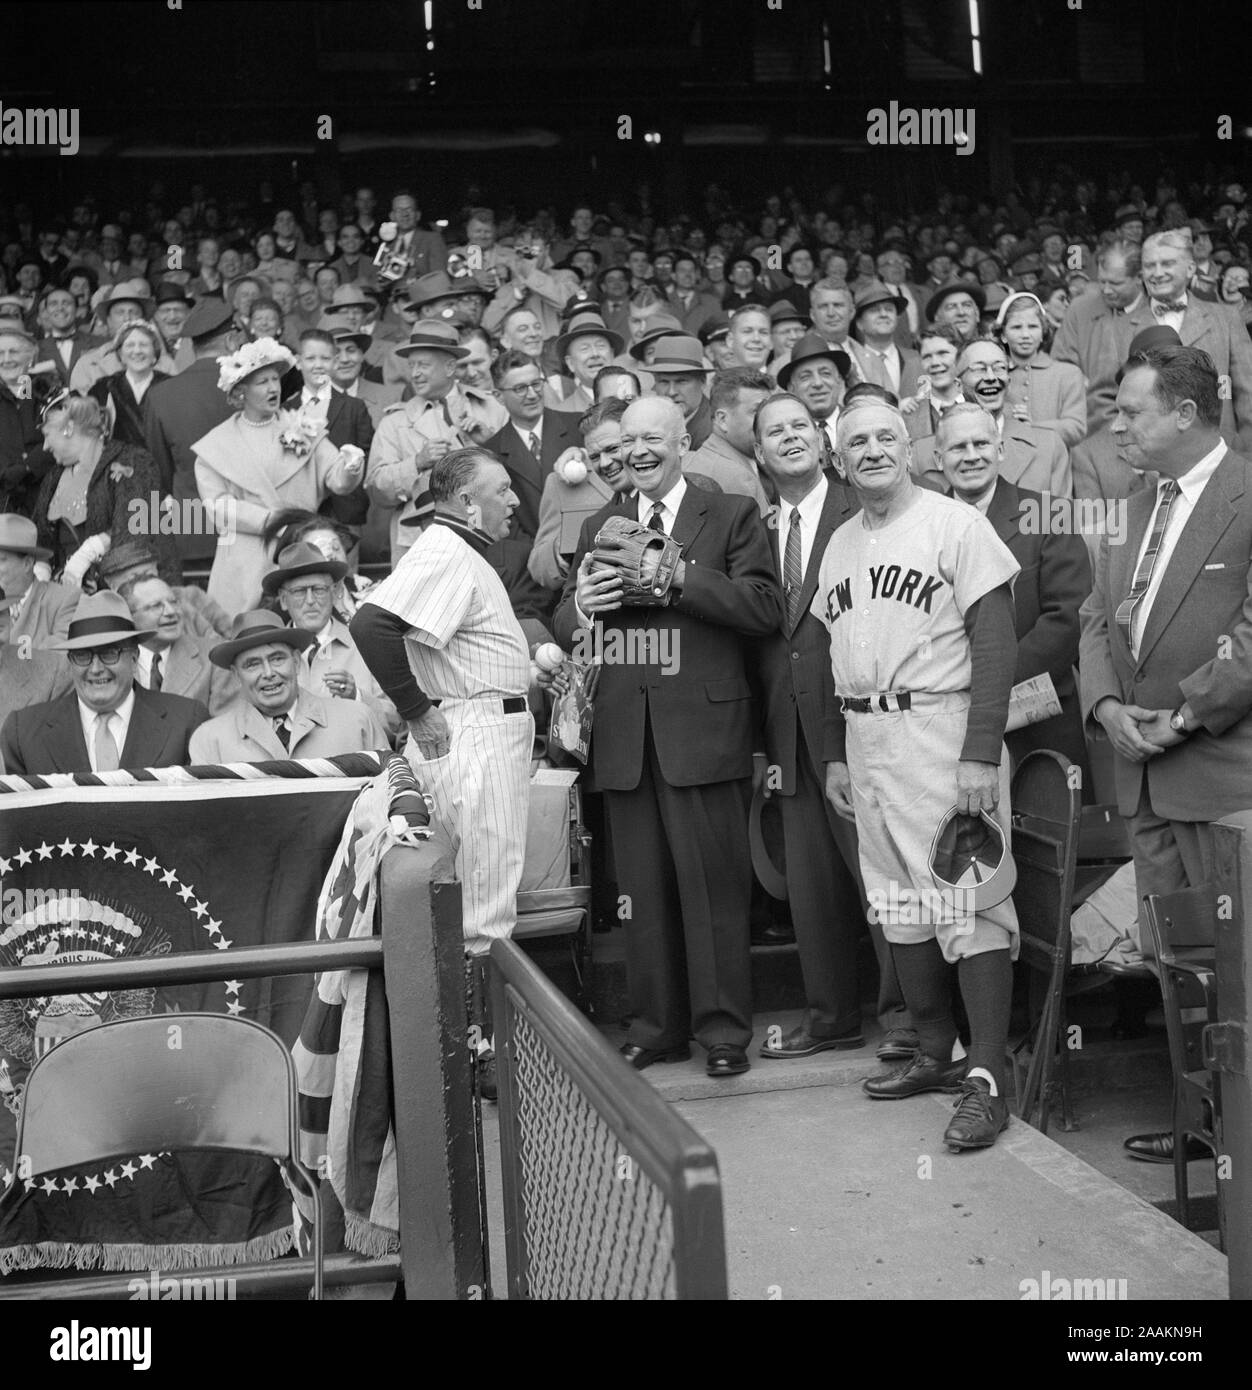 U.S. President Dwight Eisenhower getting ready to Toss out First Ball at Opening Day Baseball Game between Washington Senators and New York Yankees, Yankees Manager Casey Stengel to right, Senators Manager Chuck Dressen to left, Washington, D.C., USA, photograph by Warren K. Leffler, April 17, 1956 Stock Photo